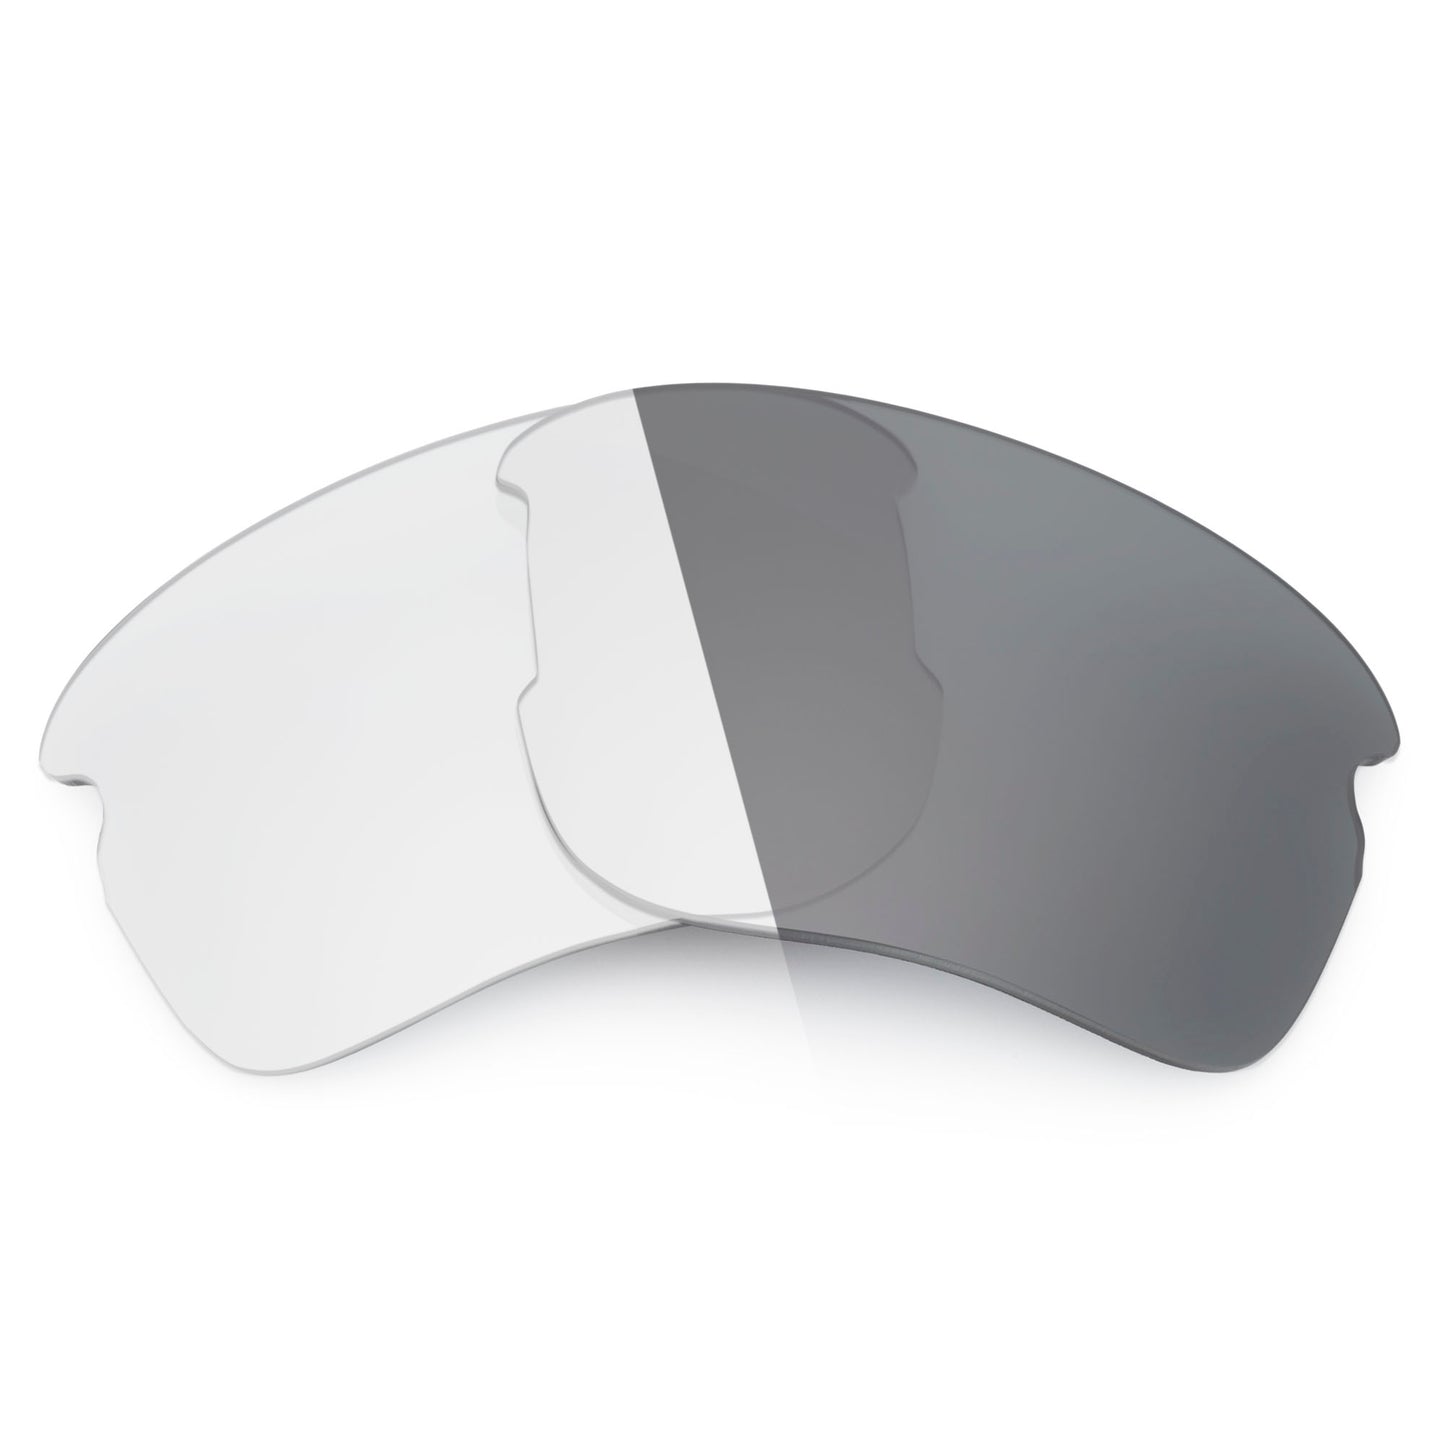 Revant replacement lenses for Oakley Flak XS (Exclusive Shape) Non-Polarized Adapt Gray Photochromic